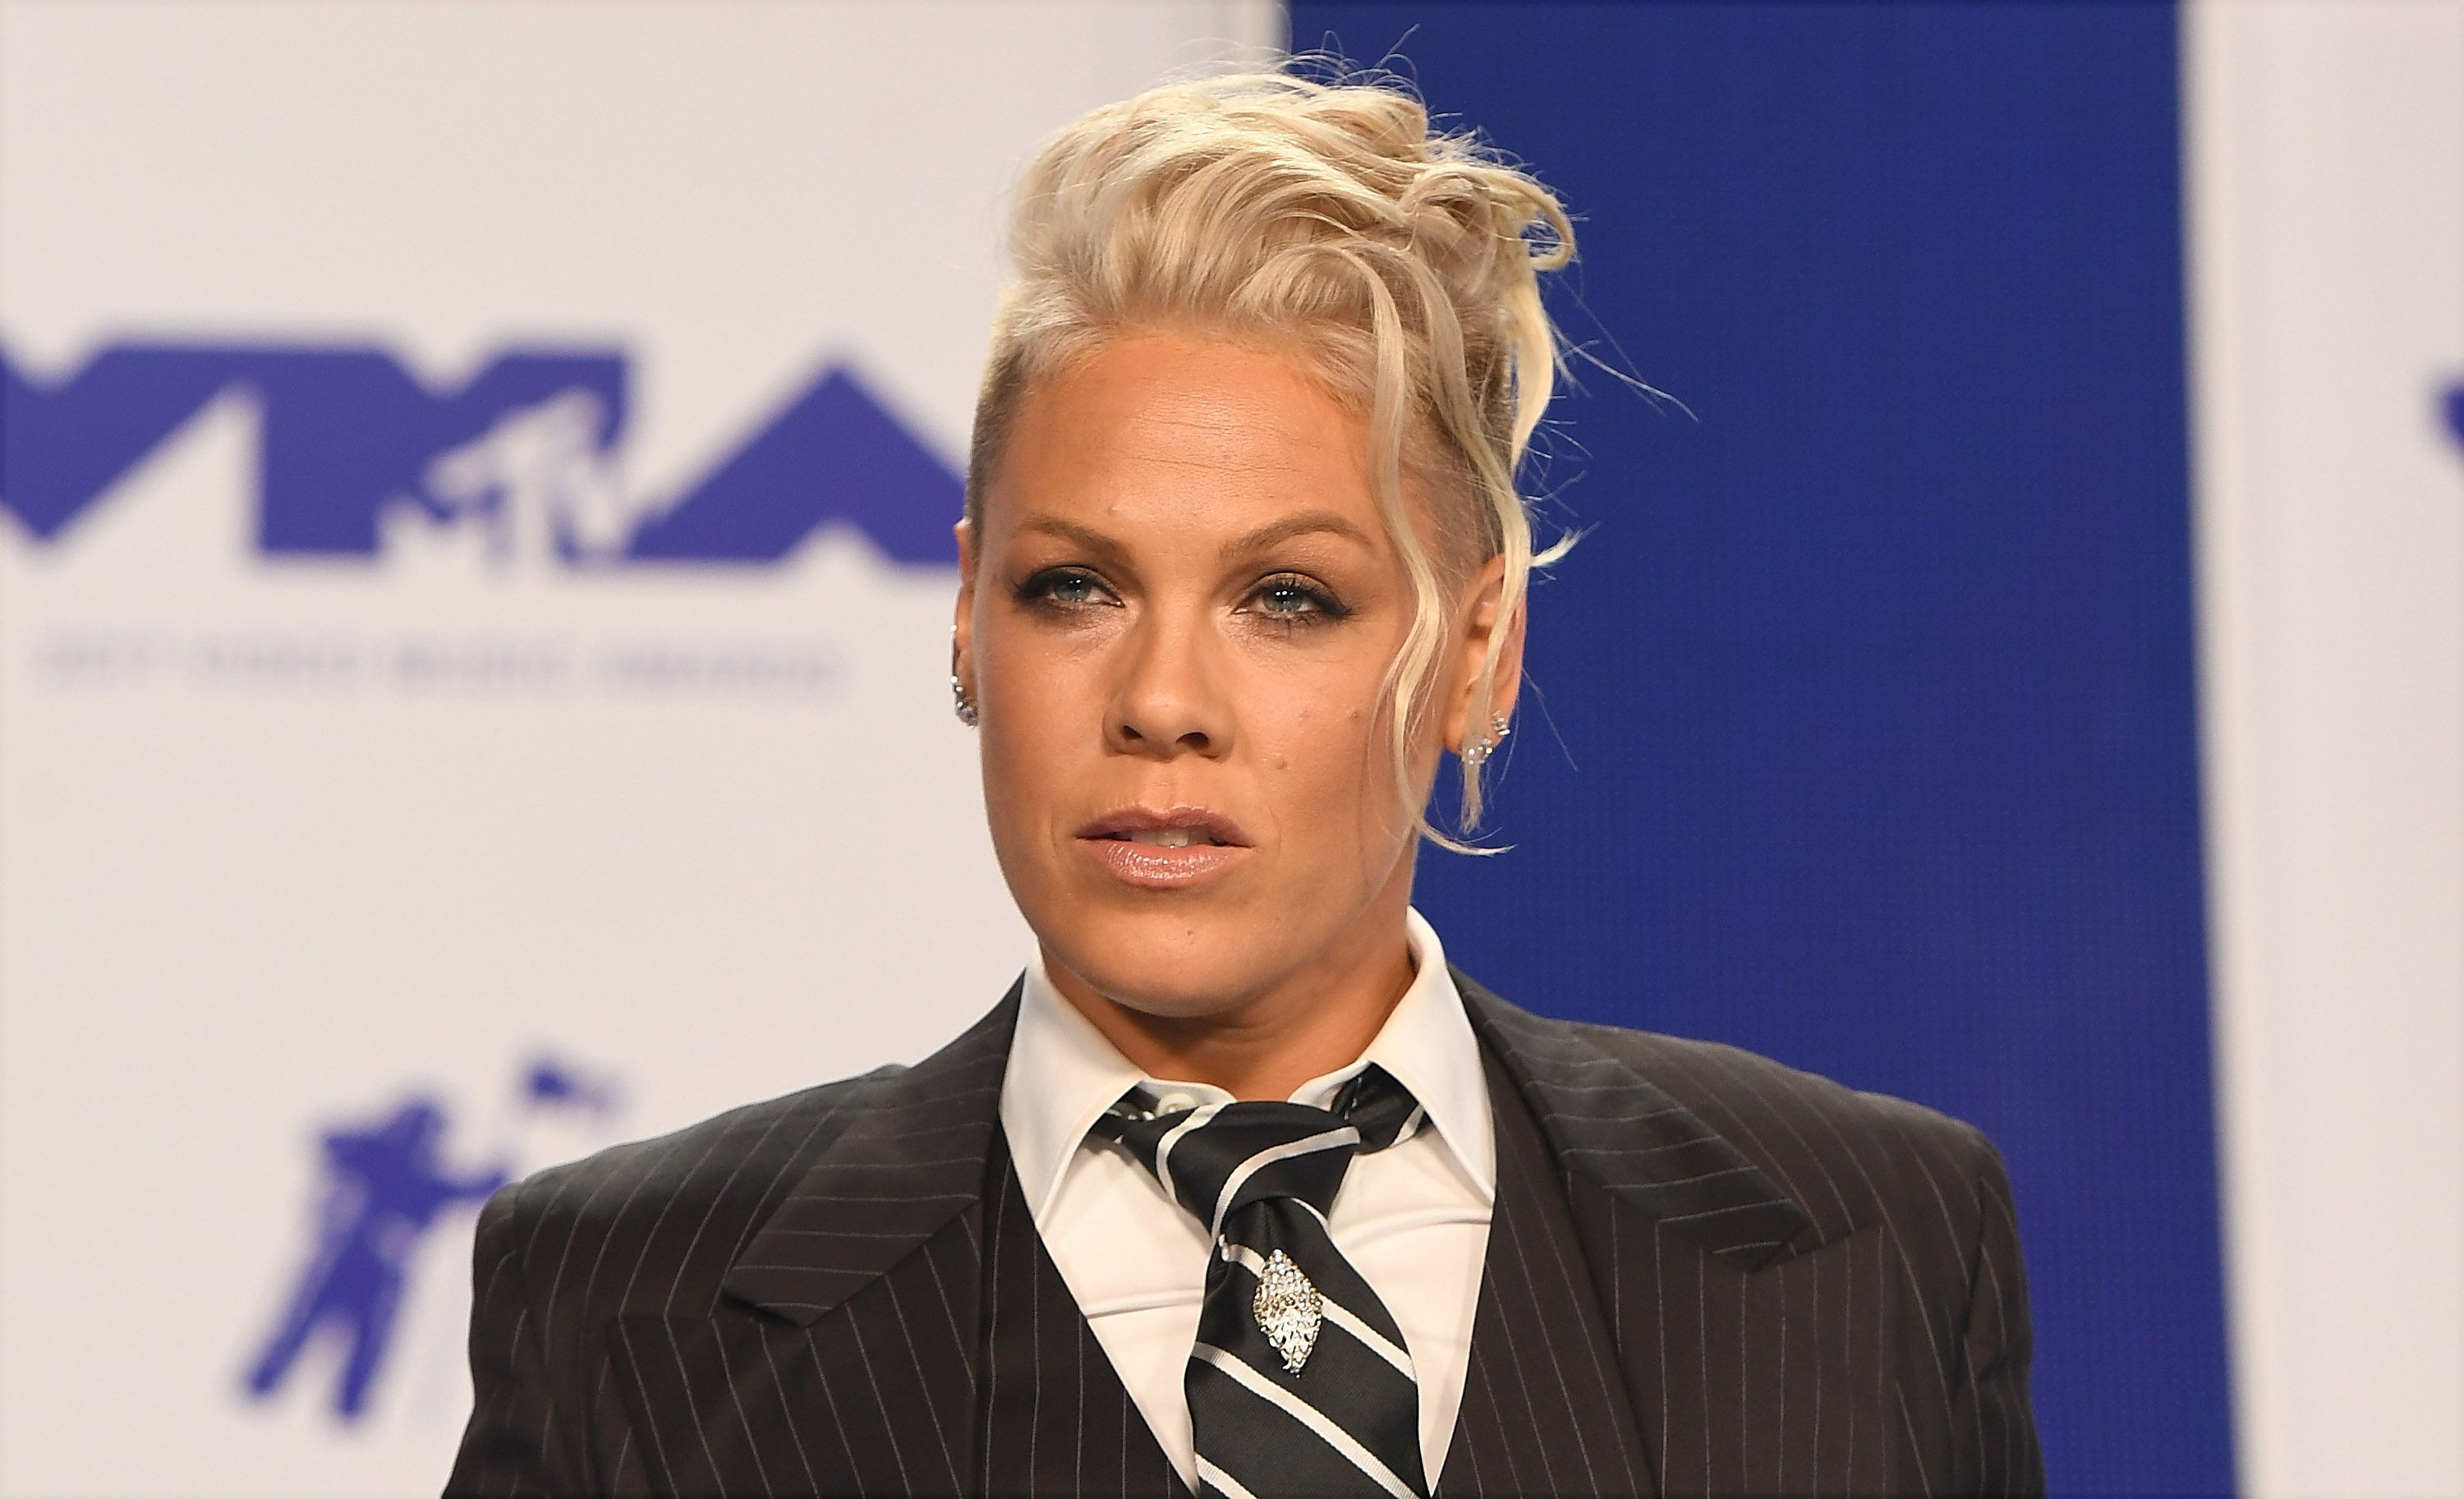 Singer Pink at the 2017 MTV Video Music Awards at The Forum on August 27, 2017 in Inglewood, California | Photo: C Flanigan/Getty Images